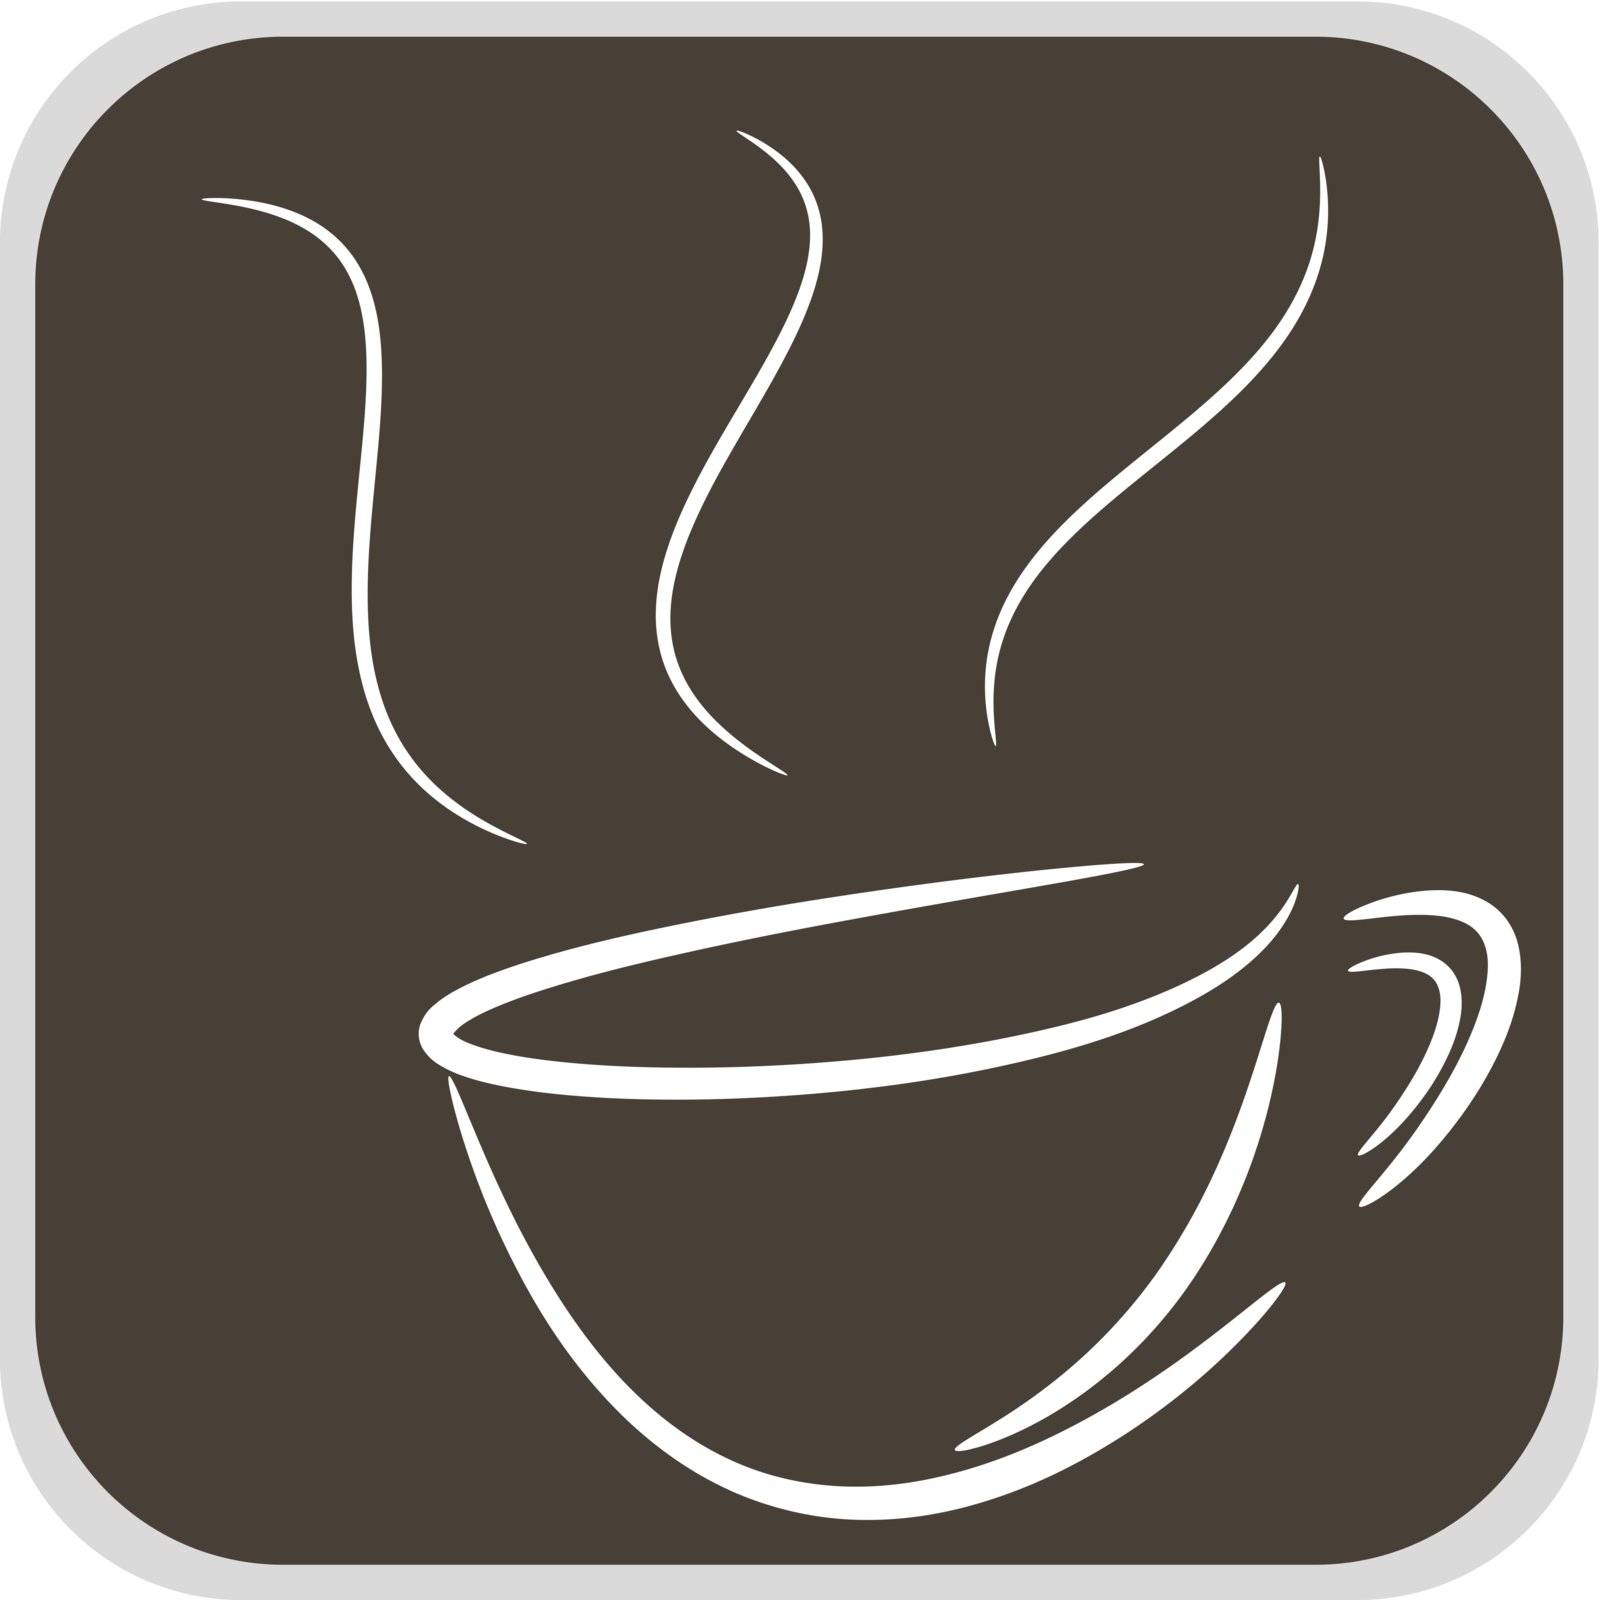 Coffee draw line in the brown background illustration